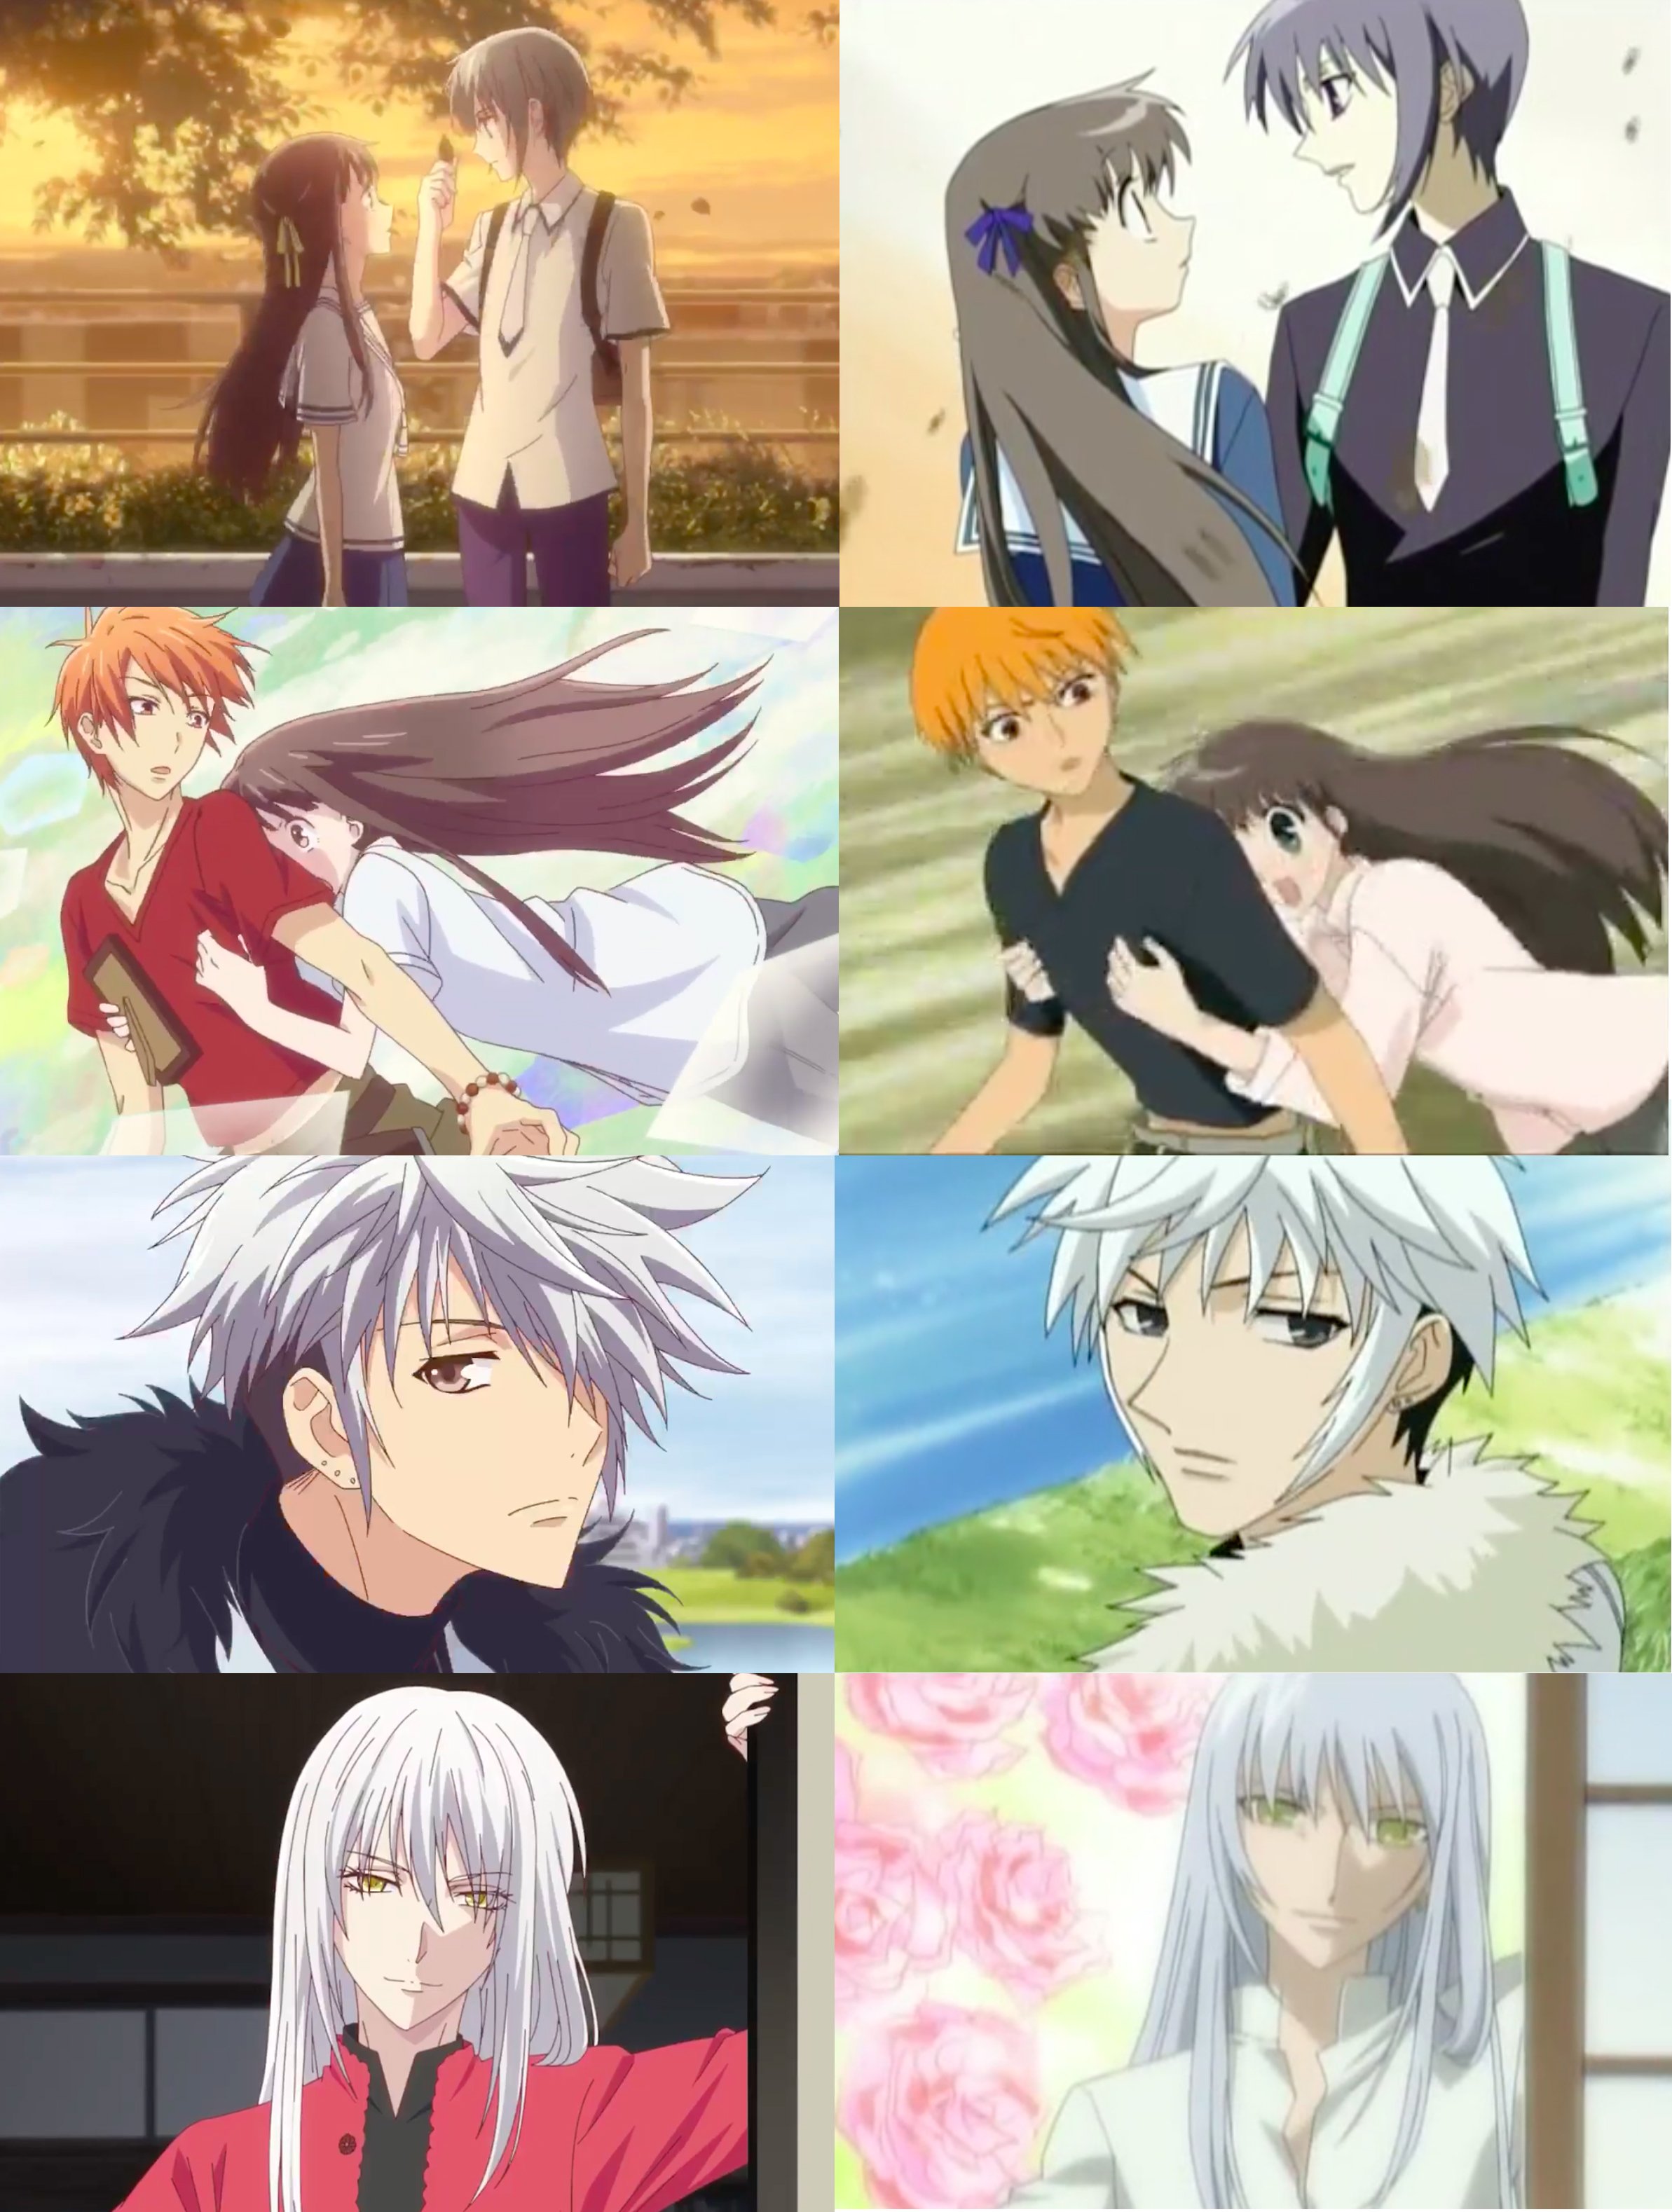 How Can You Be So Cruel  Evolution of Fruits Basket 2001 to 2019